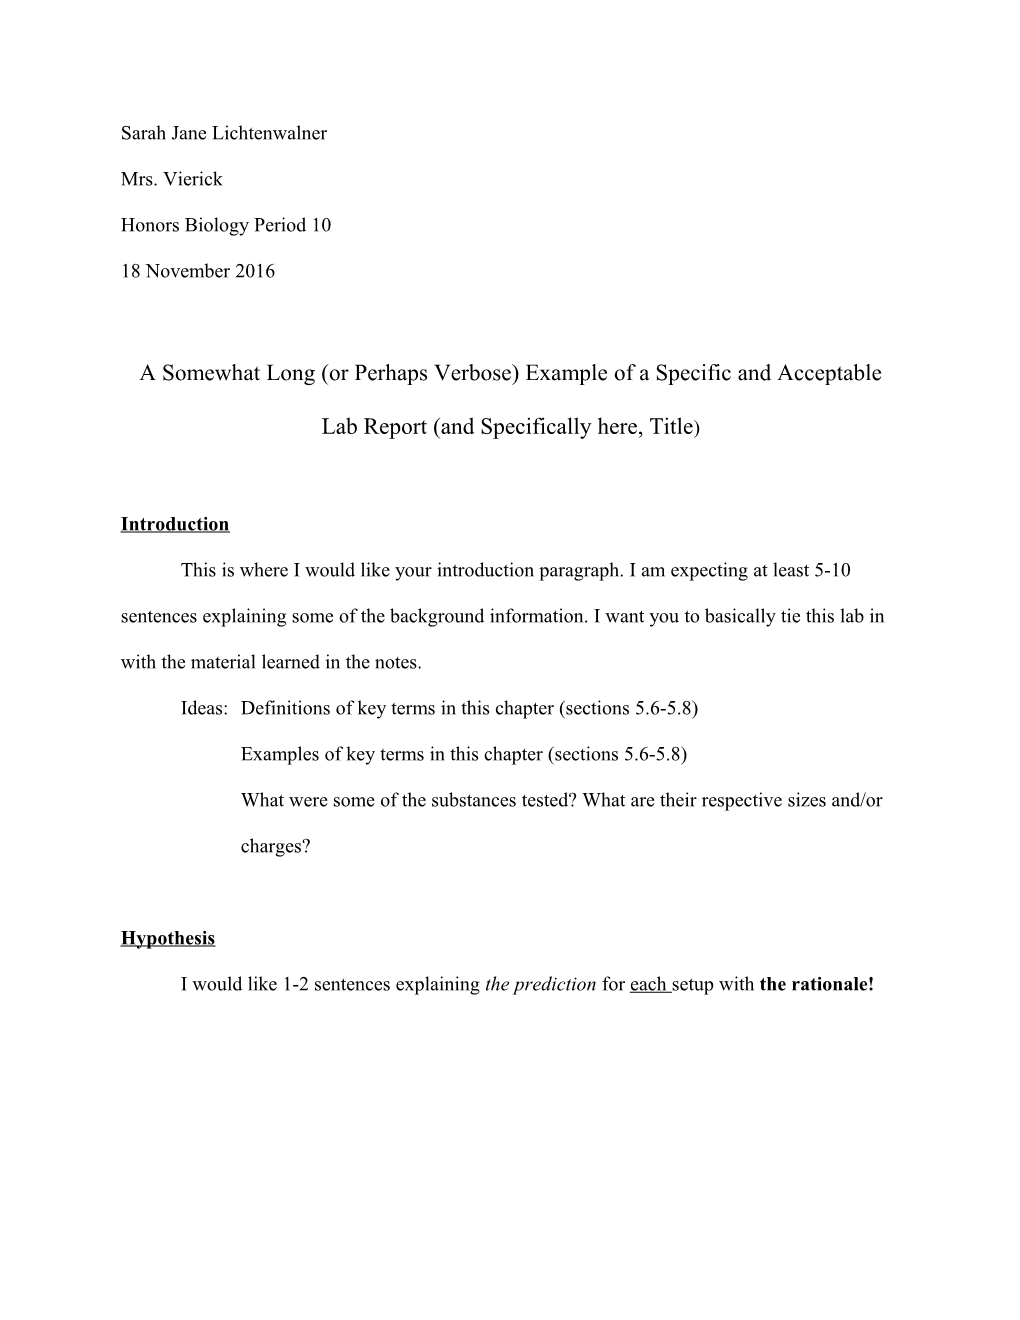 A Somewhat Long (Or Perhaps Verbose) Example of a Specific and Acceptable Lab Report